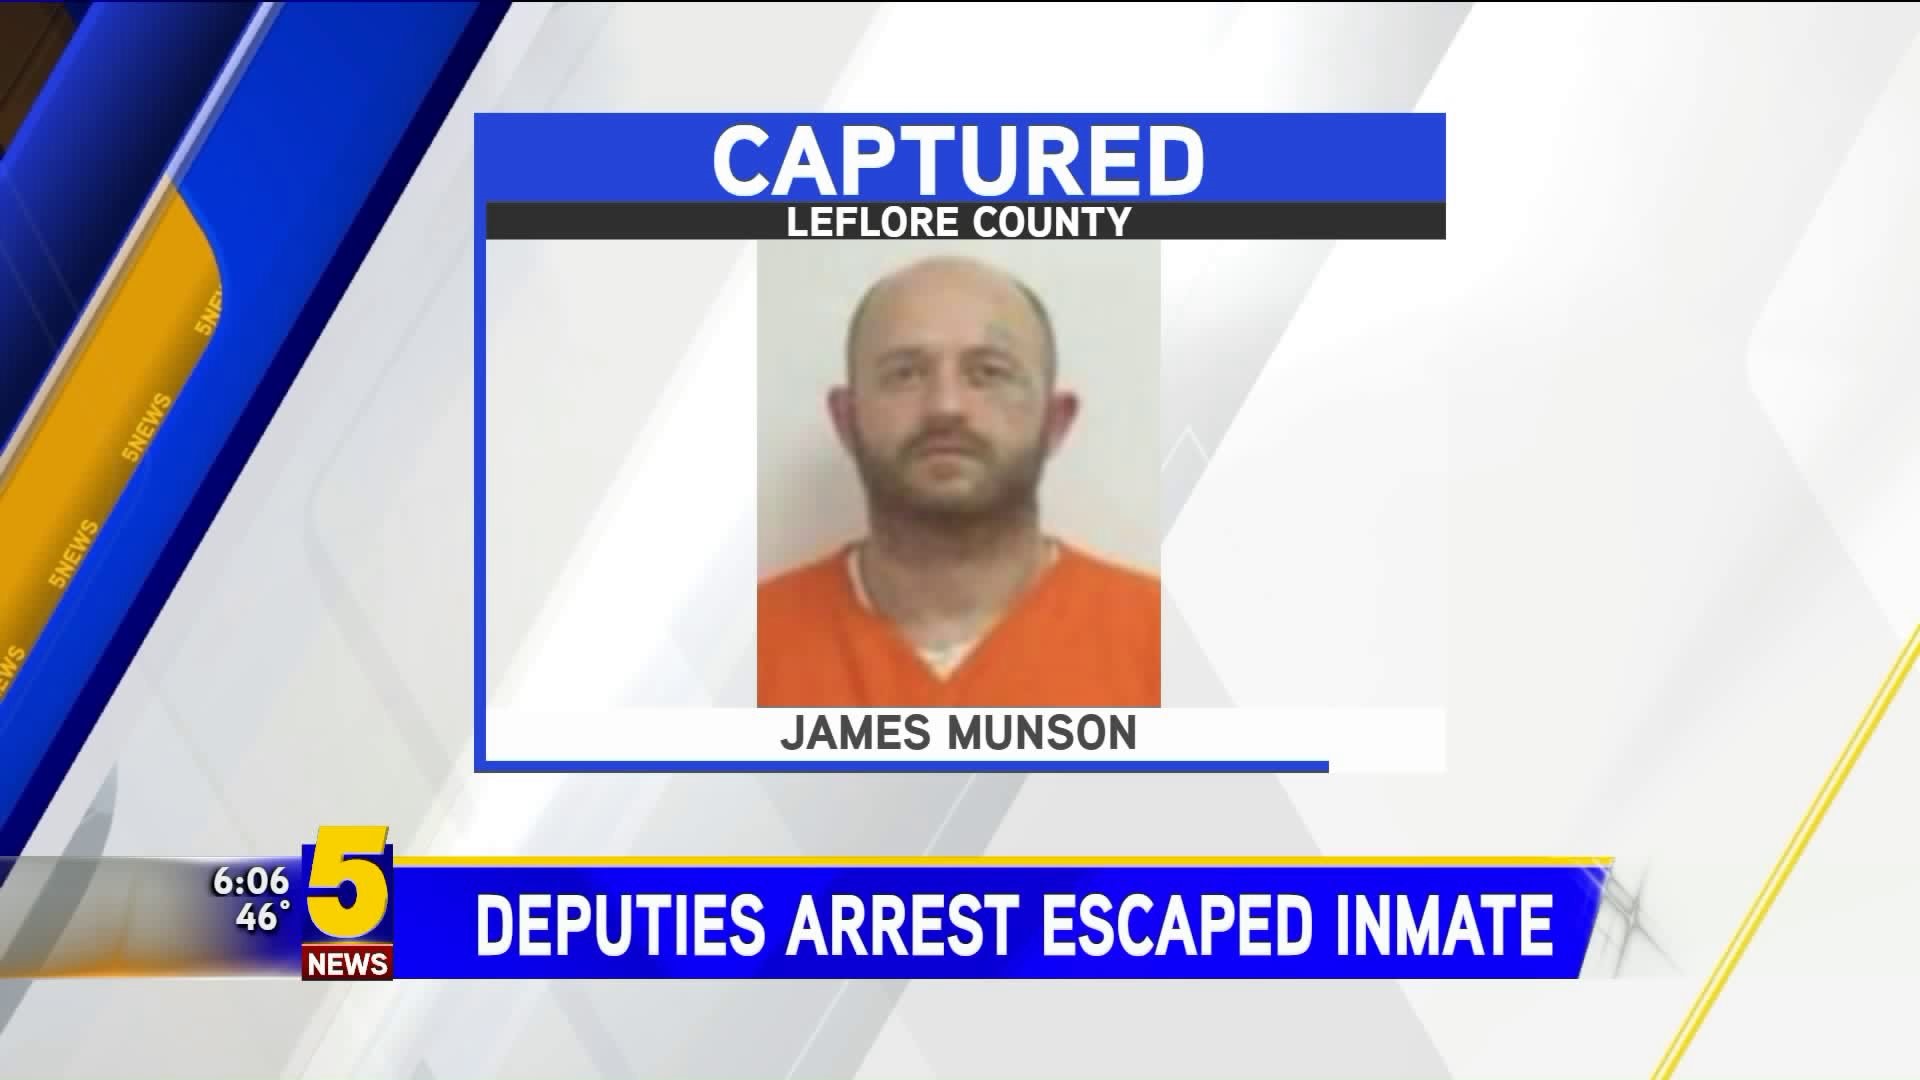 Deputies Arrest Escaped Inmate In LeFlore County